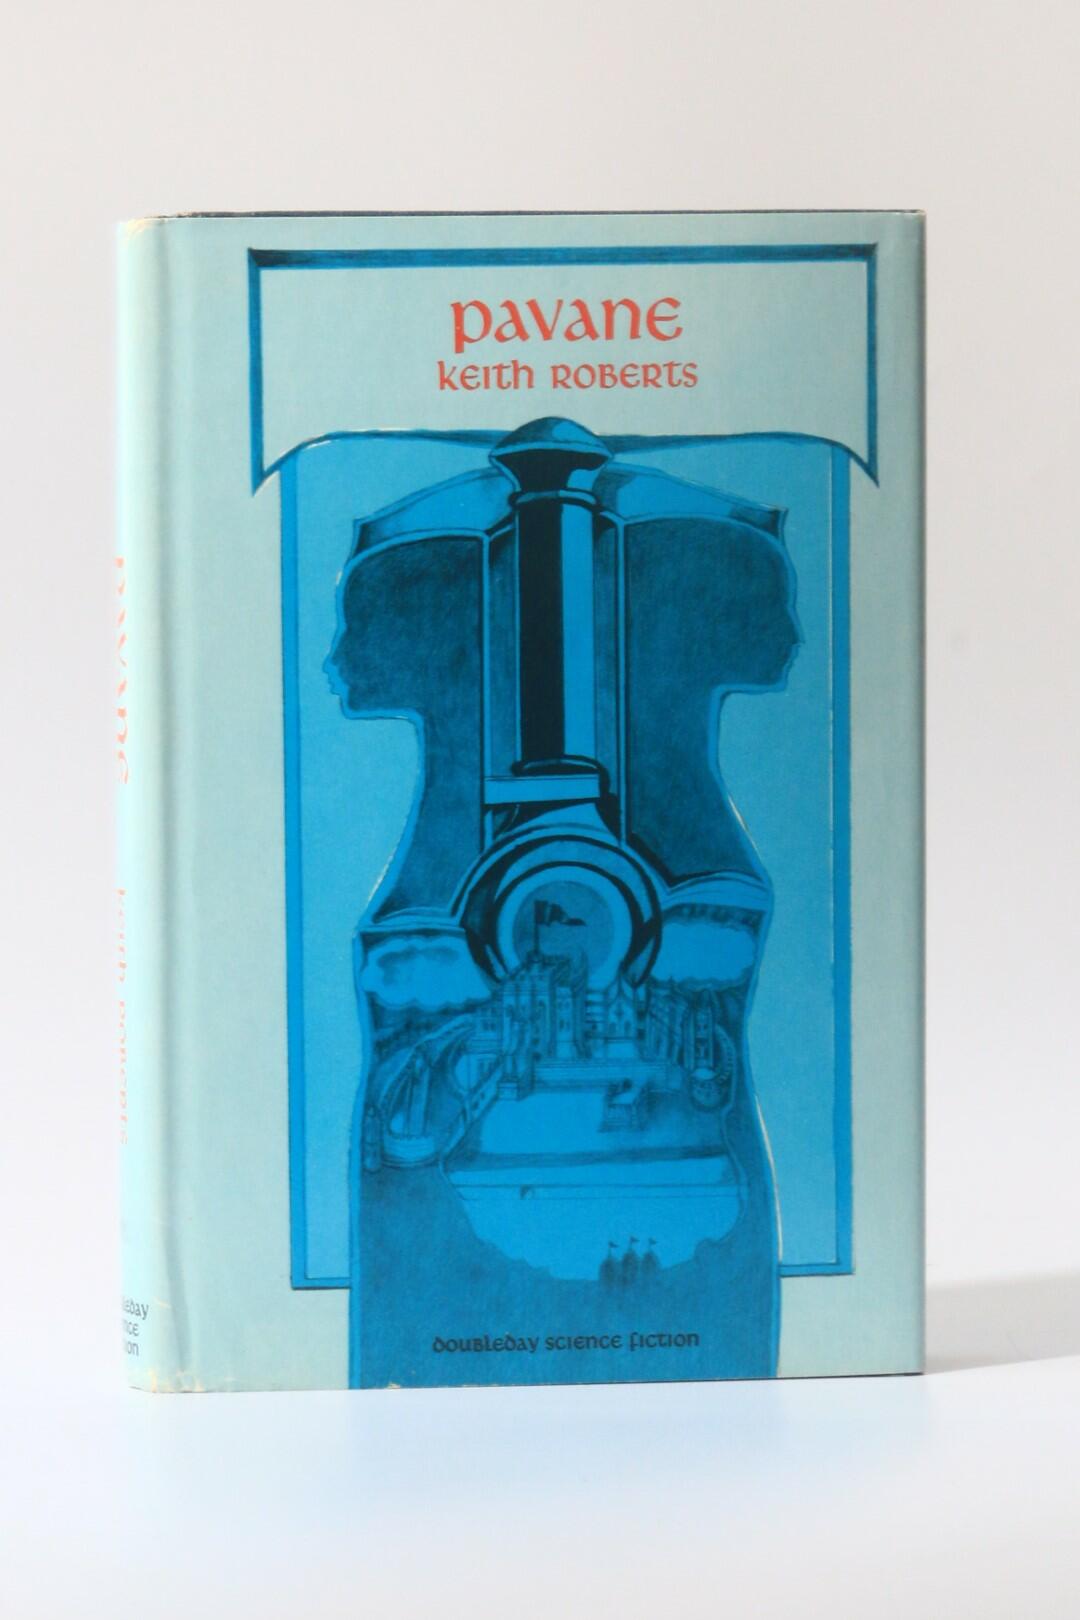 Keith Roberts - Pavane - Doubleday, 1968, First Edition.